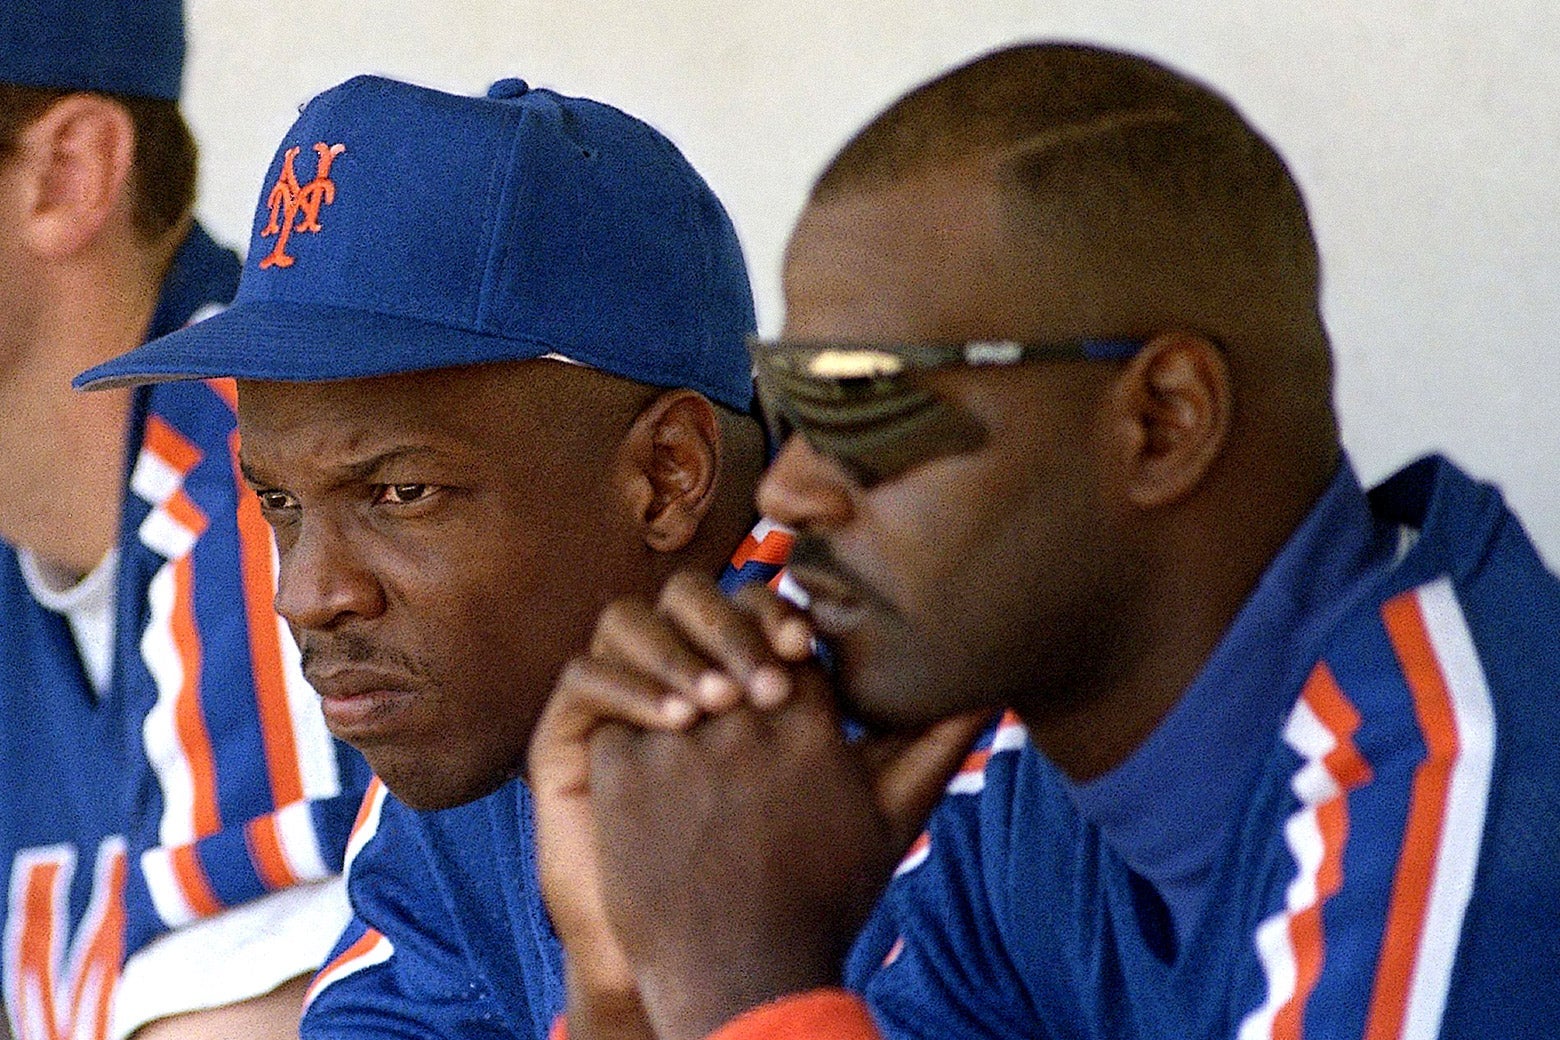 Dwight Gooden and Daryl Boston watch the game against the Atlanta Braves.